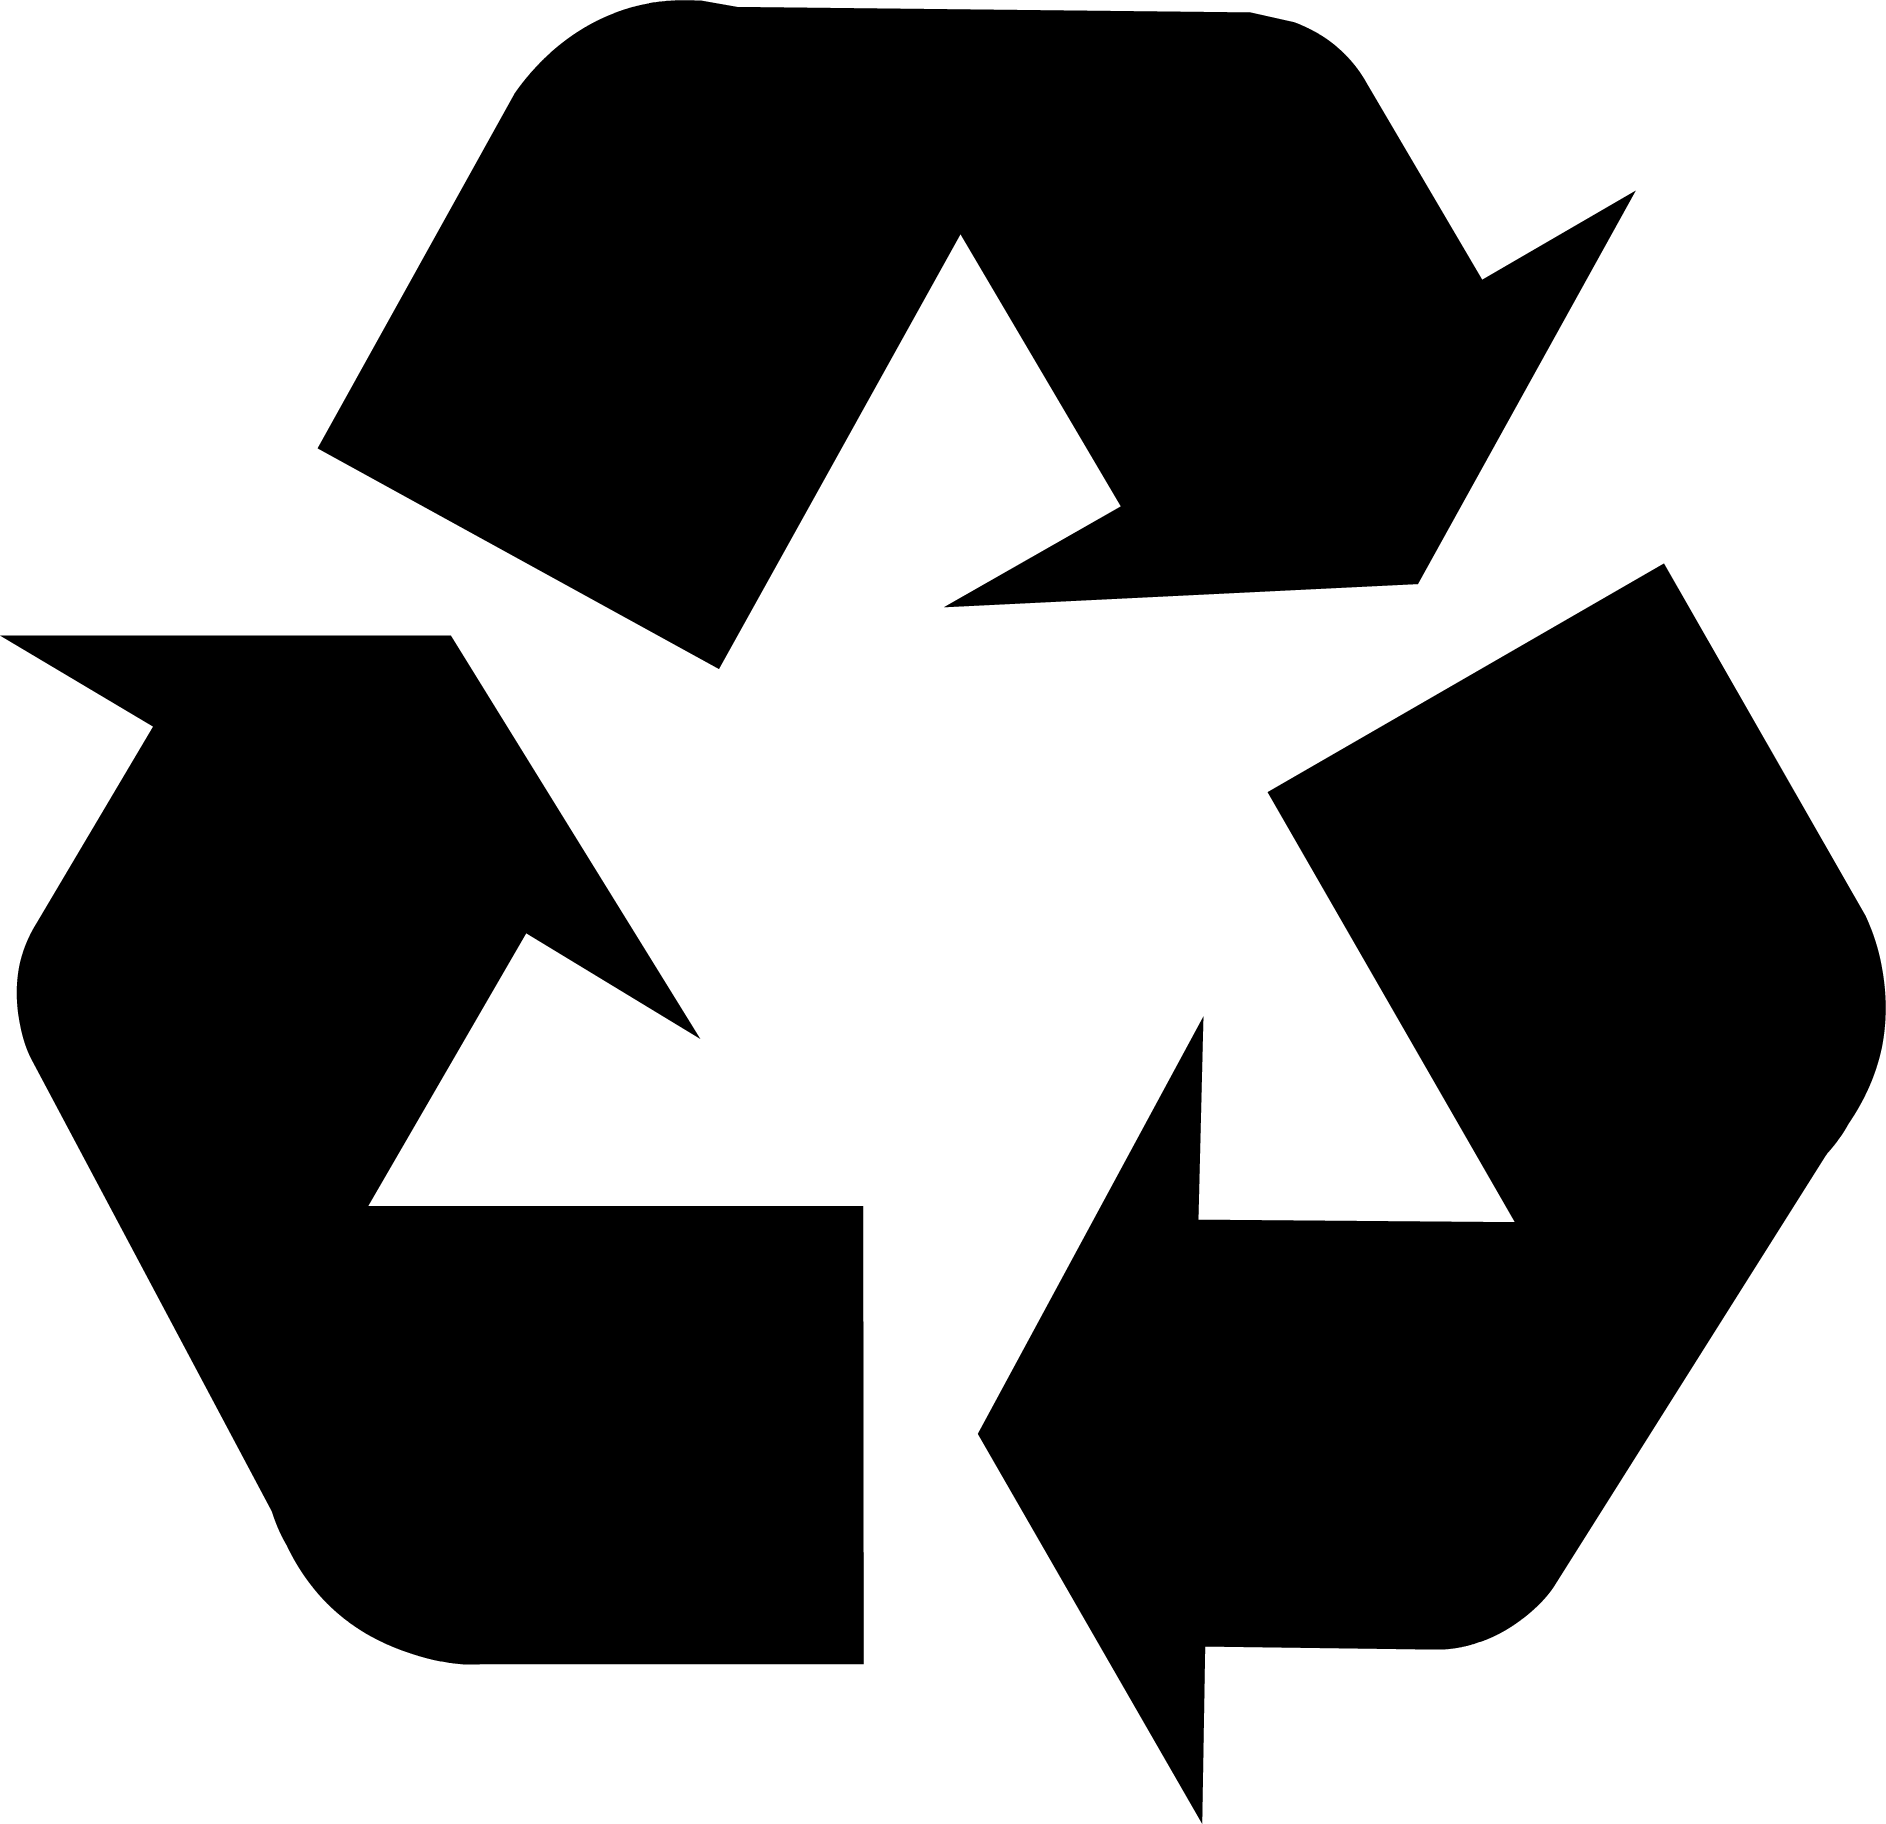 Large Recycle Logo - Recycling Symbol - Download the Original Recycle Logo